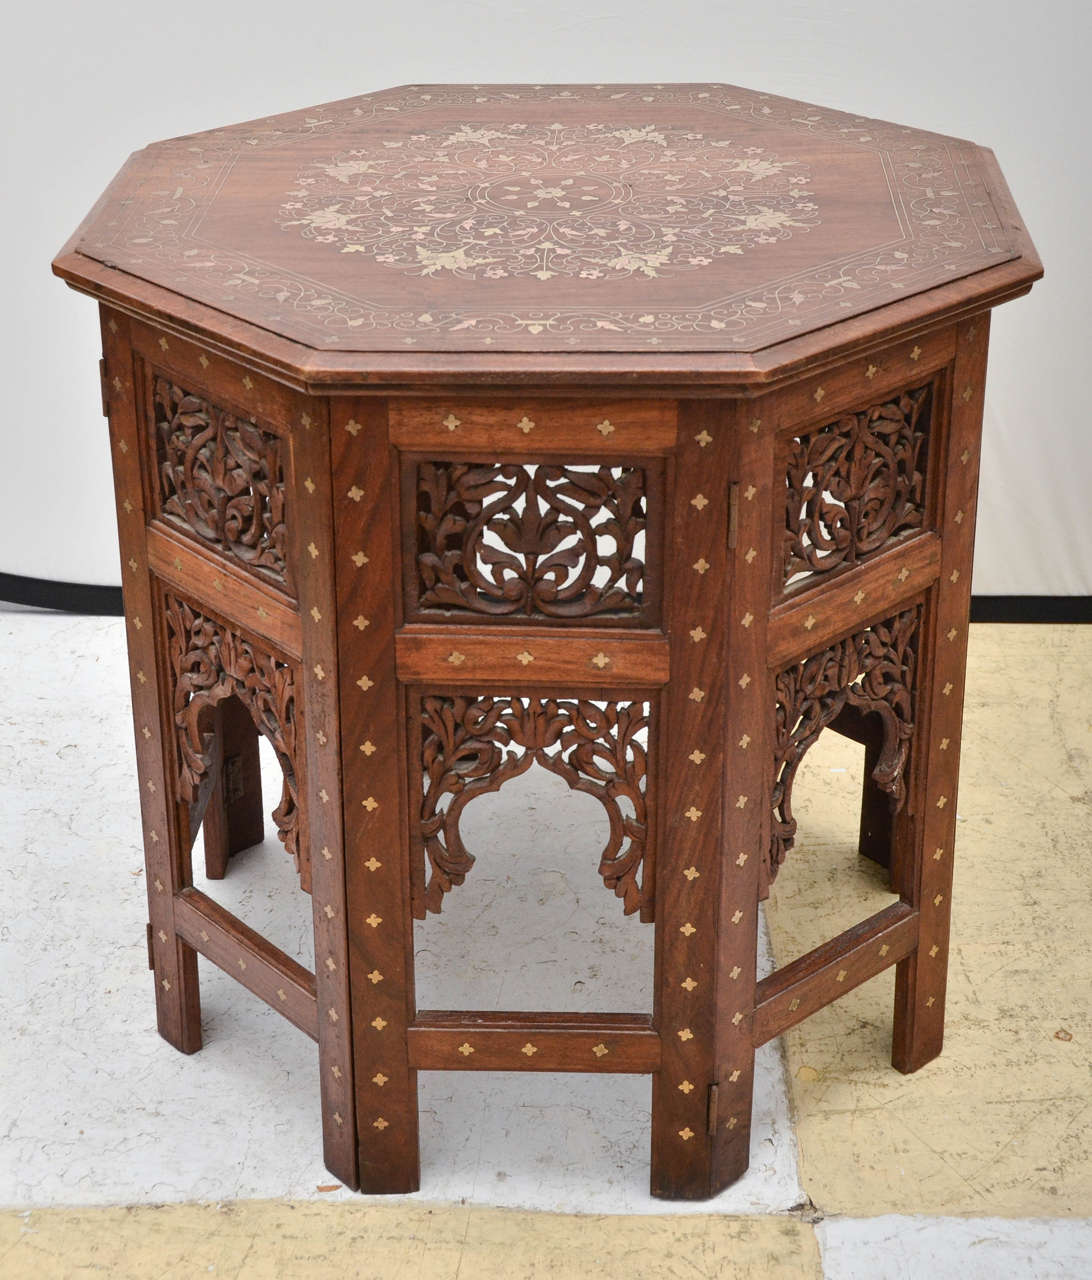 Large octagonal Indian teak occasional table with brass inlay. On a folding pierced fretwork design base. The top is inlaid with brass floral bouquets and trailing vines. A few of the inlays are copper. The sides have cut-out floral designs and